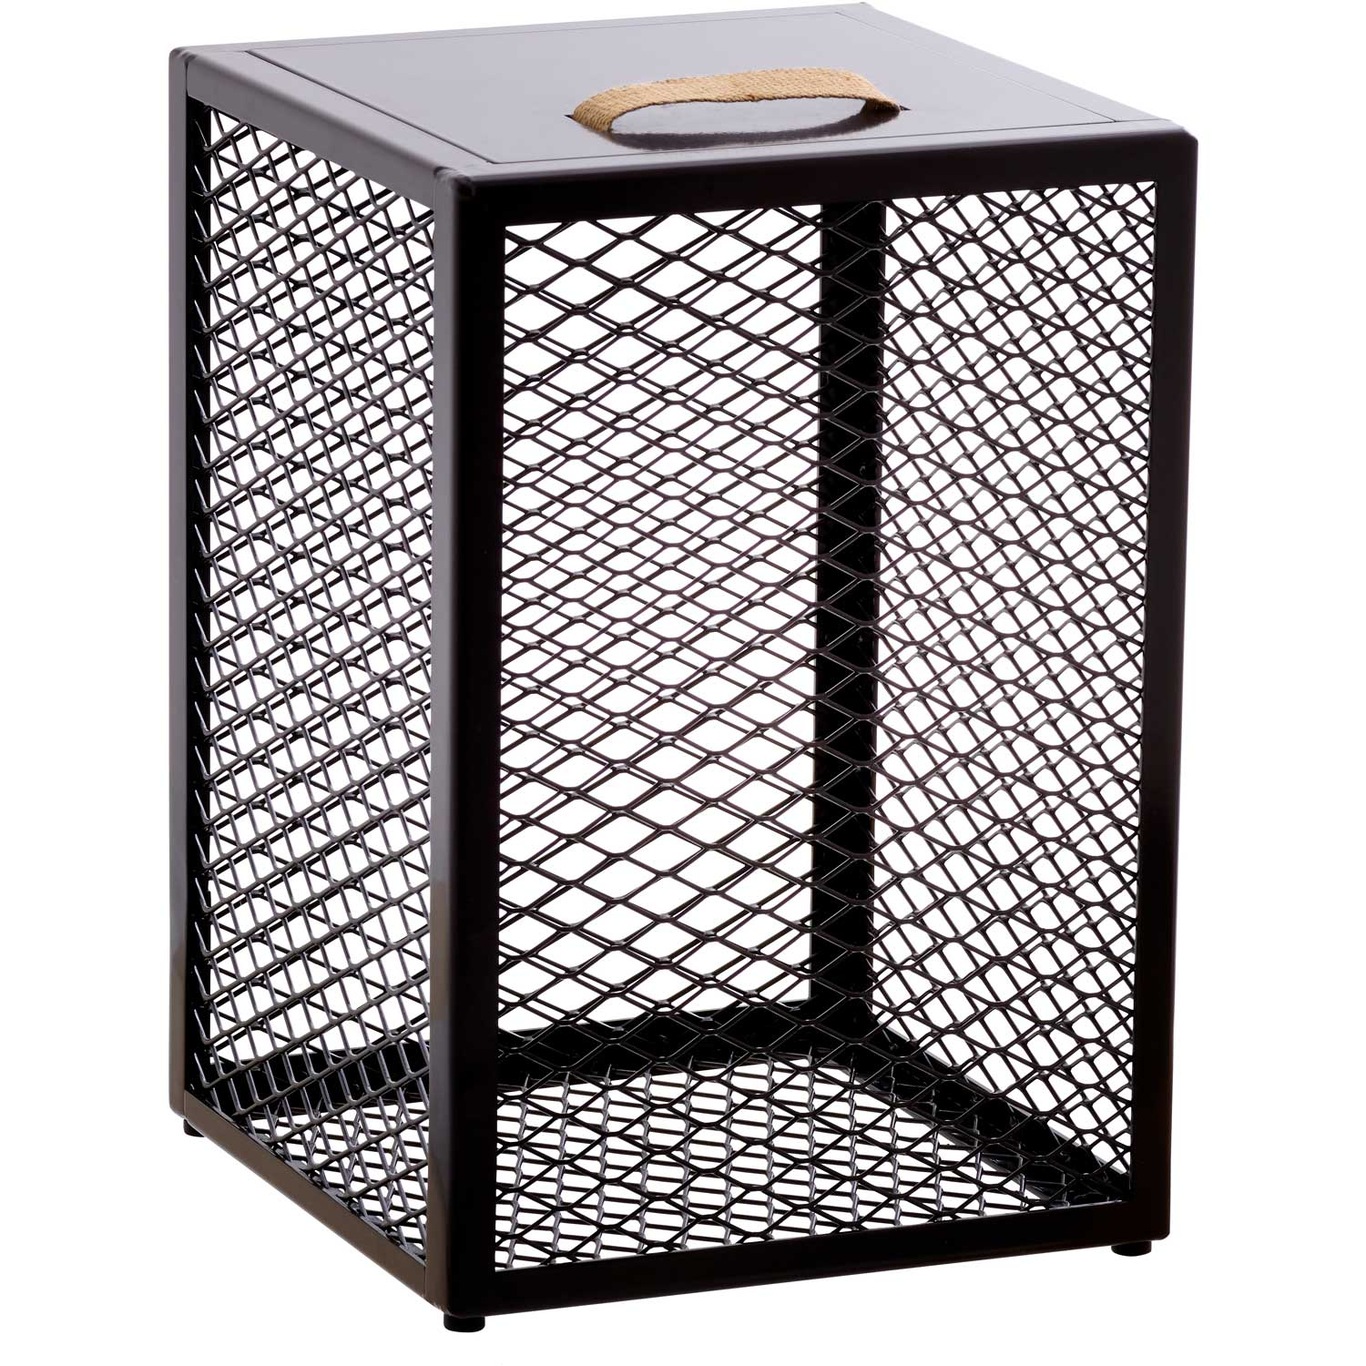 The Cube Side Table, Dark Chocolate